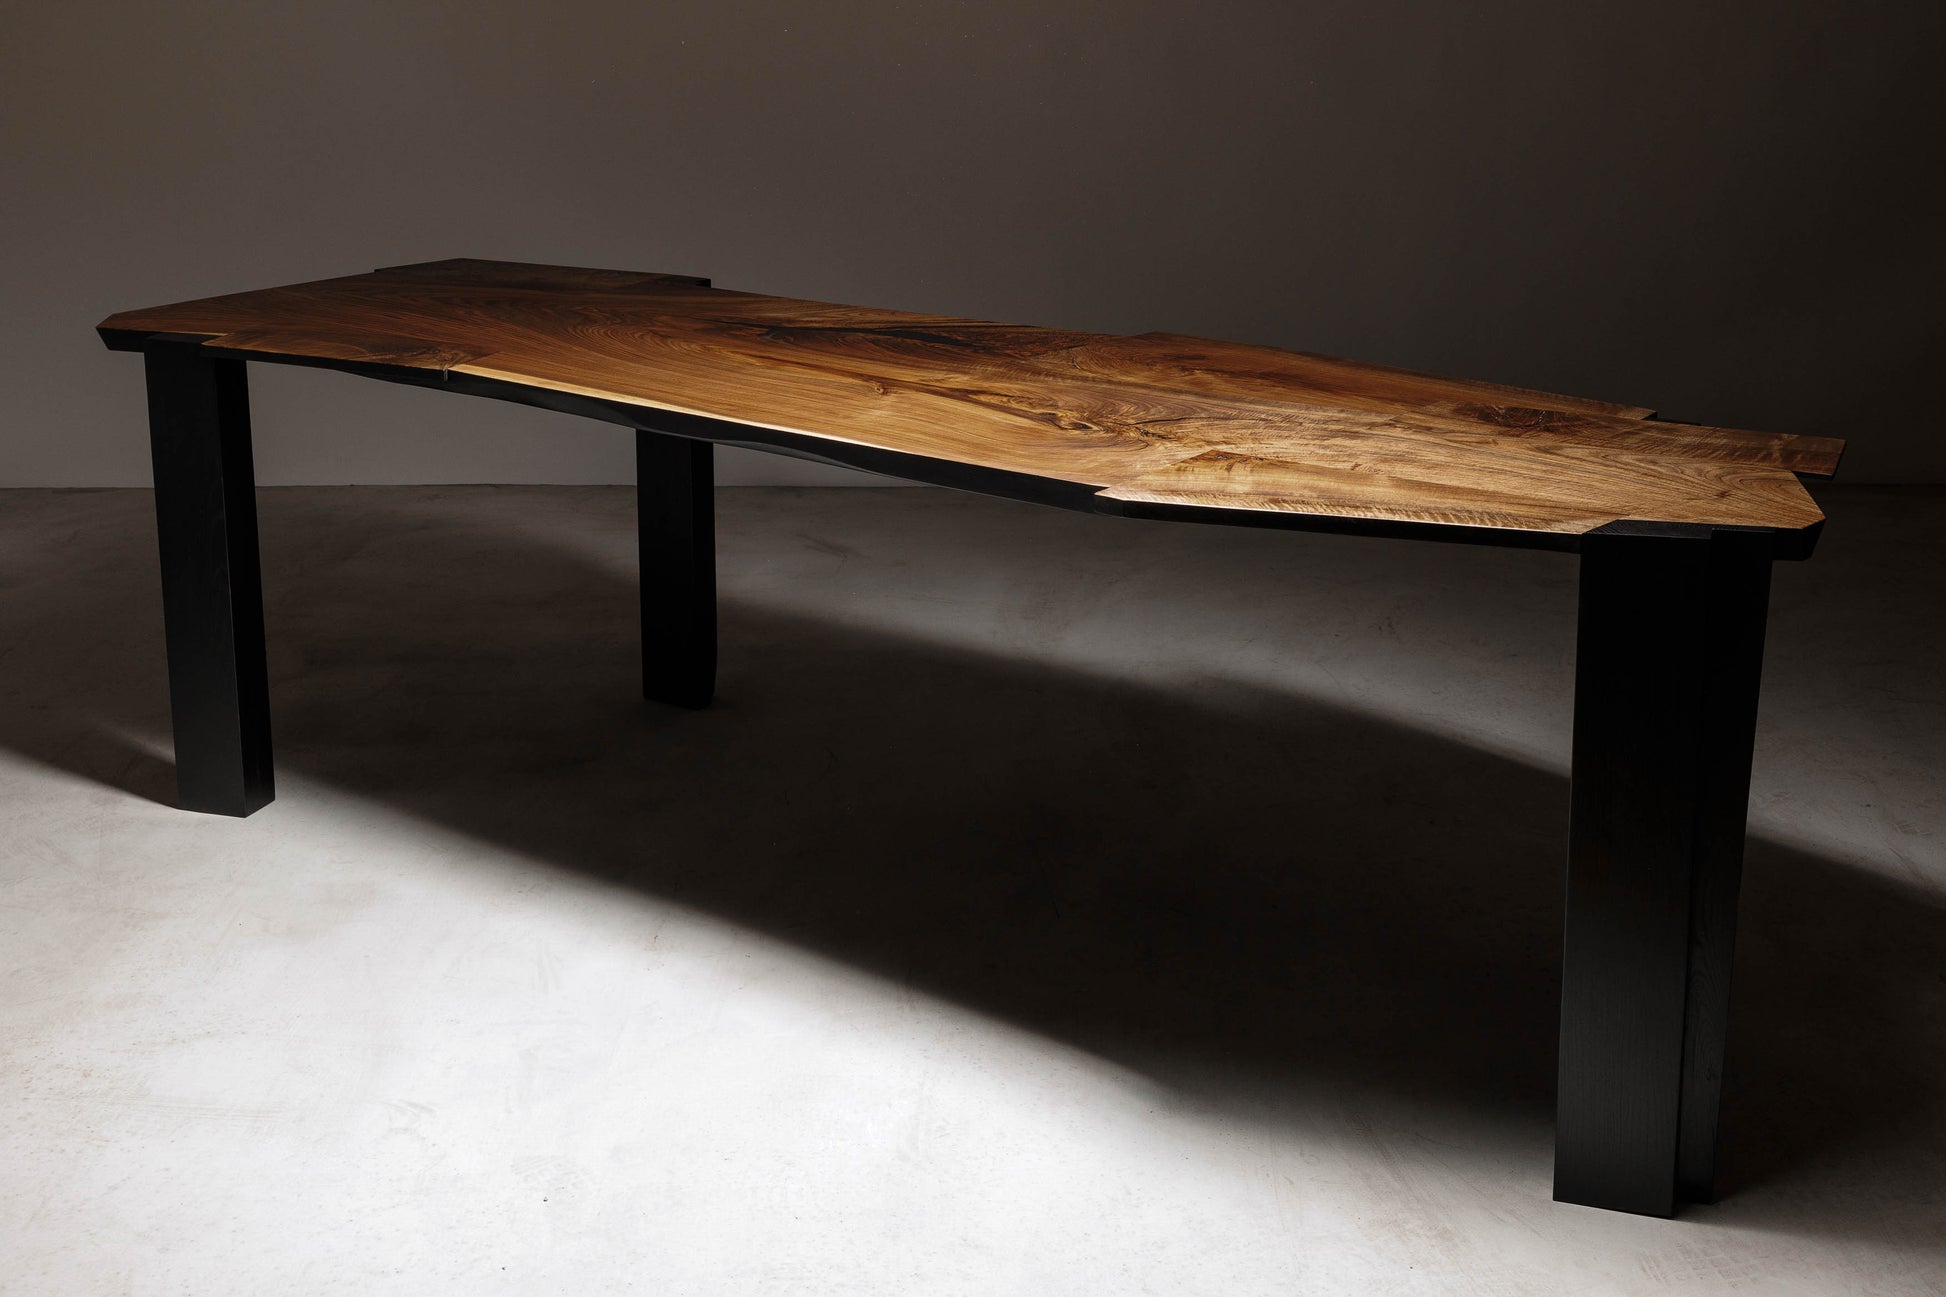 EM201 Of 18Brut Collection | Sideview image of the table in a dimmed light. 